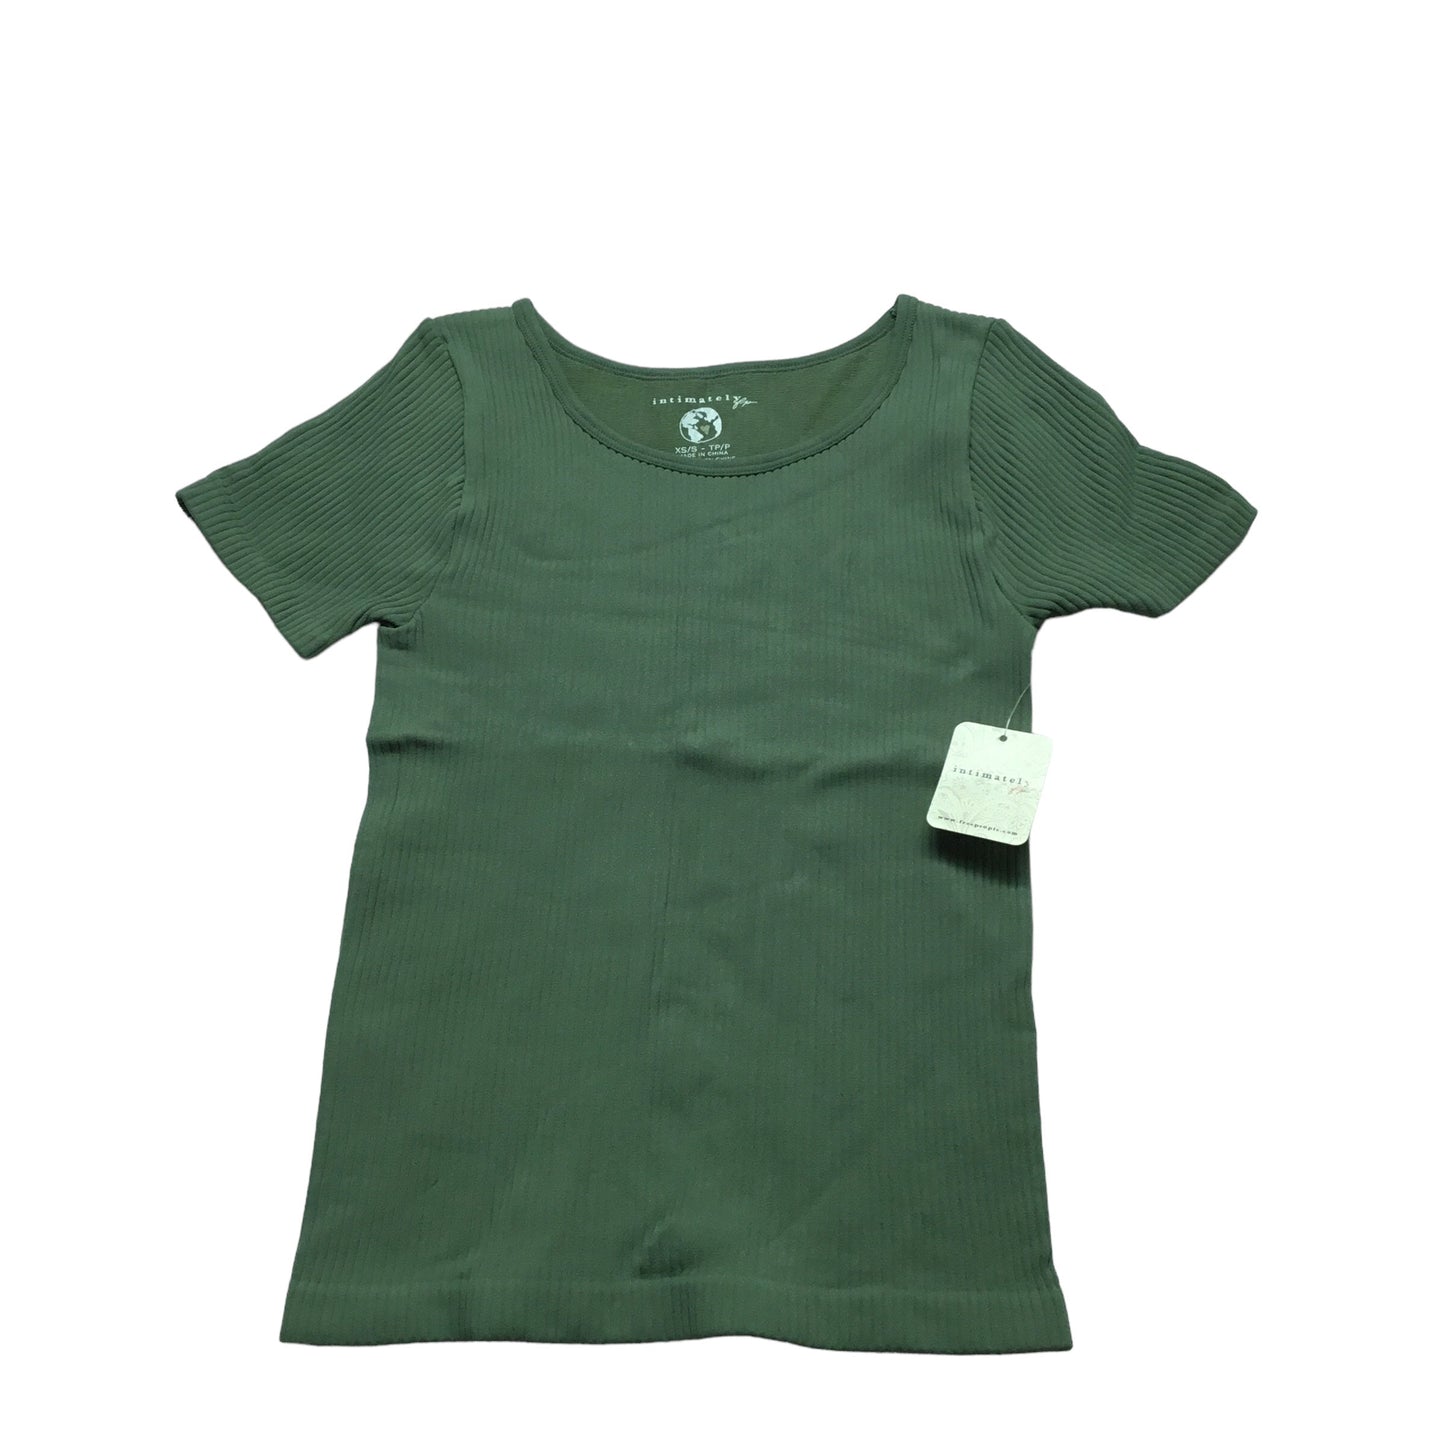 Green Top Short Sleeve Basic Free People, Size XS/S